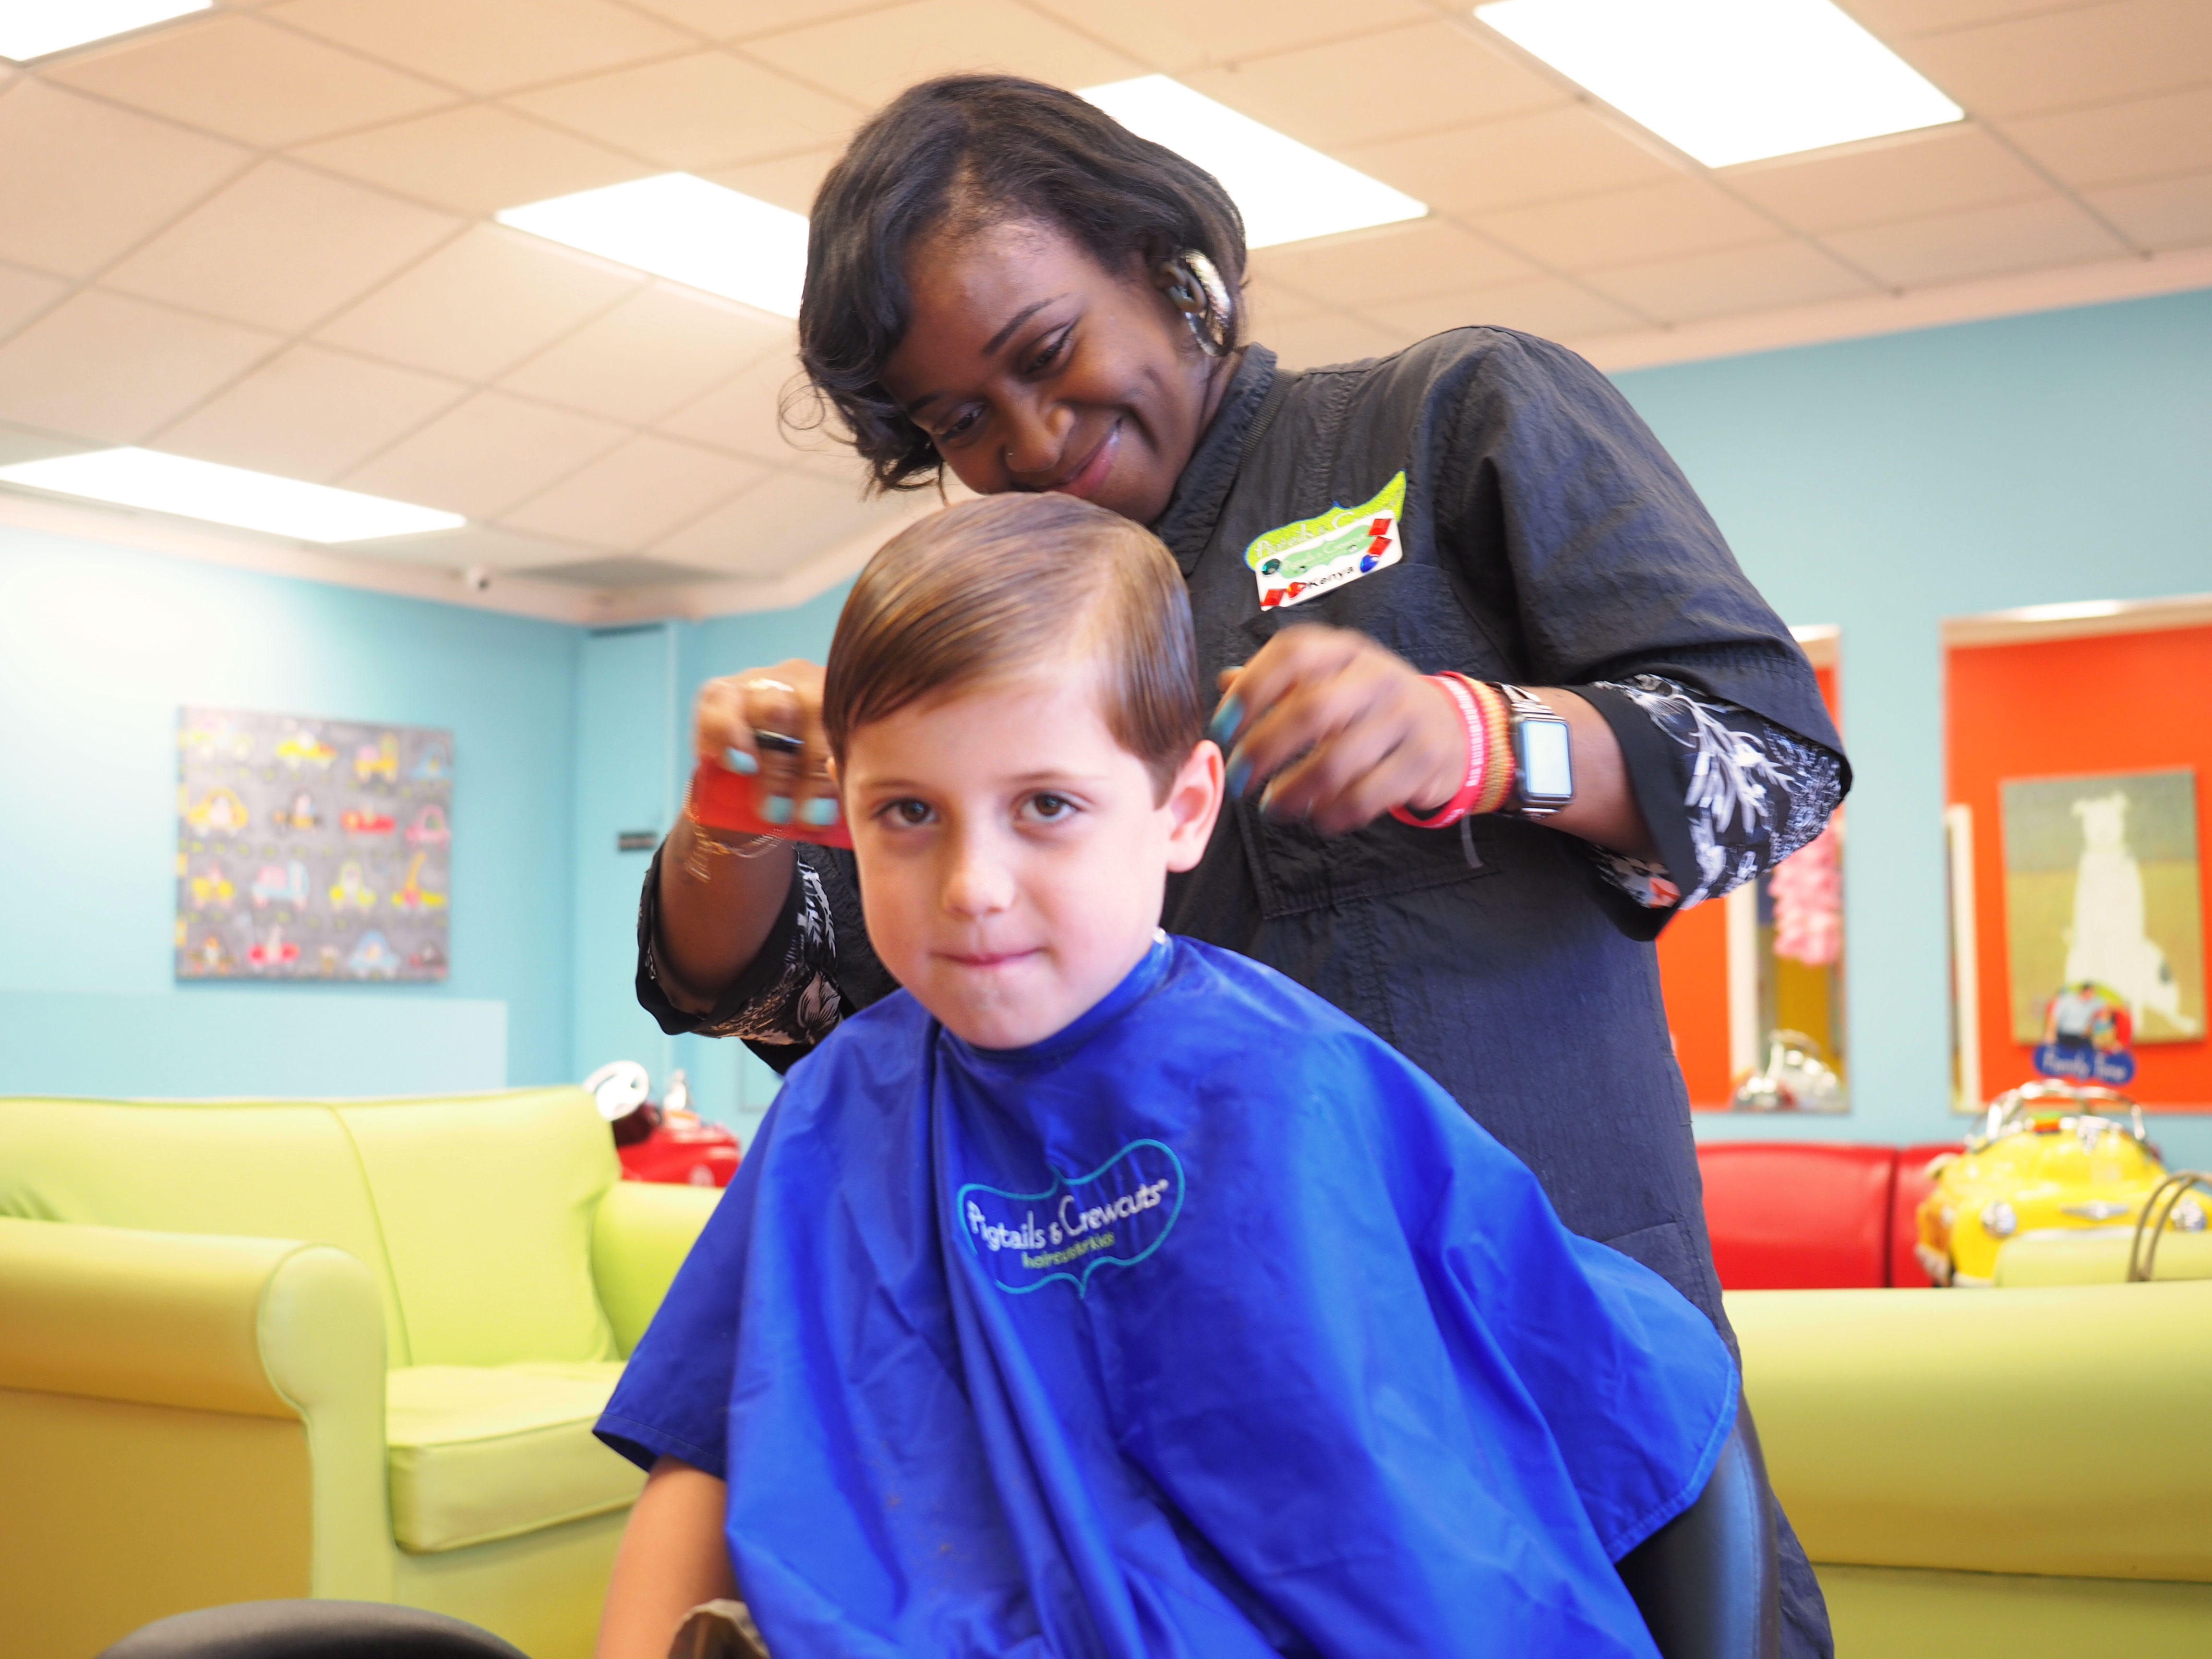 Pigtails & Crewcuts: Haircuts for Kids - San Antonio - Lincoln Heights, TX